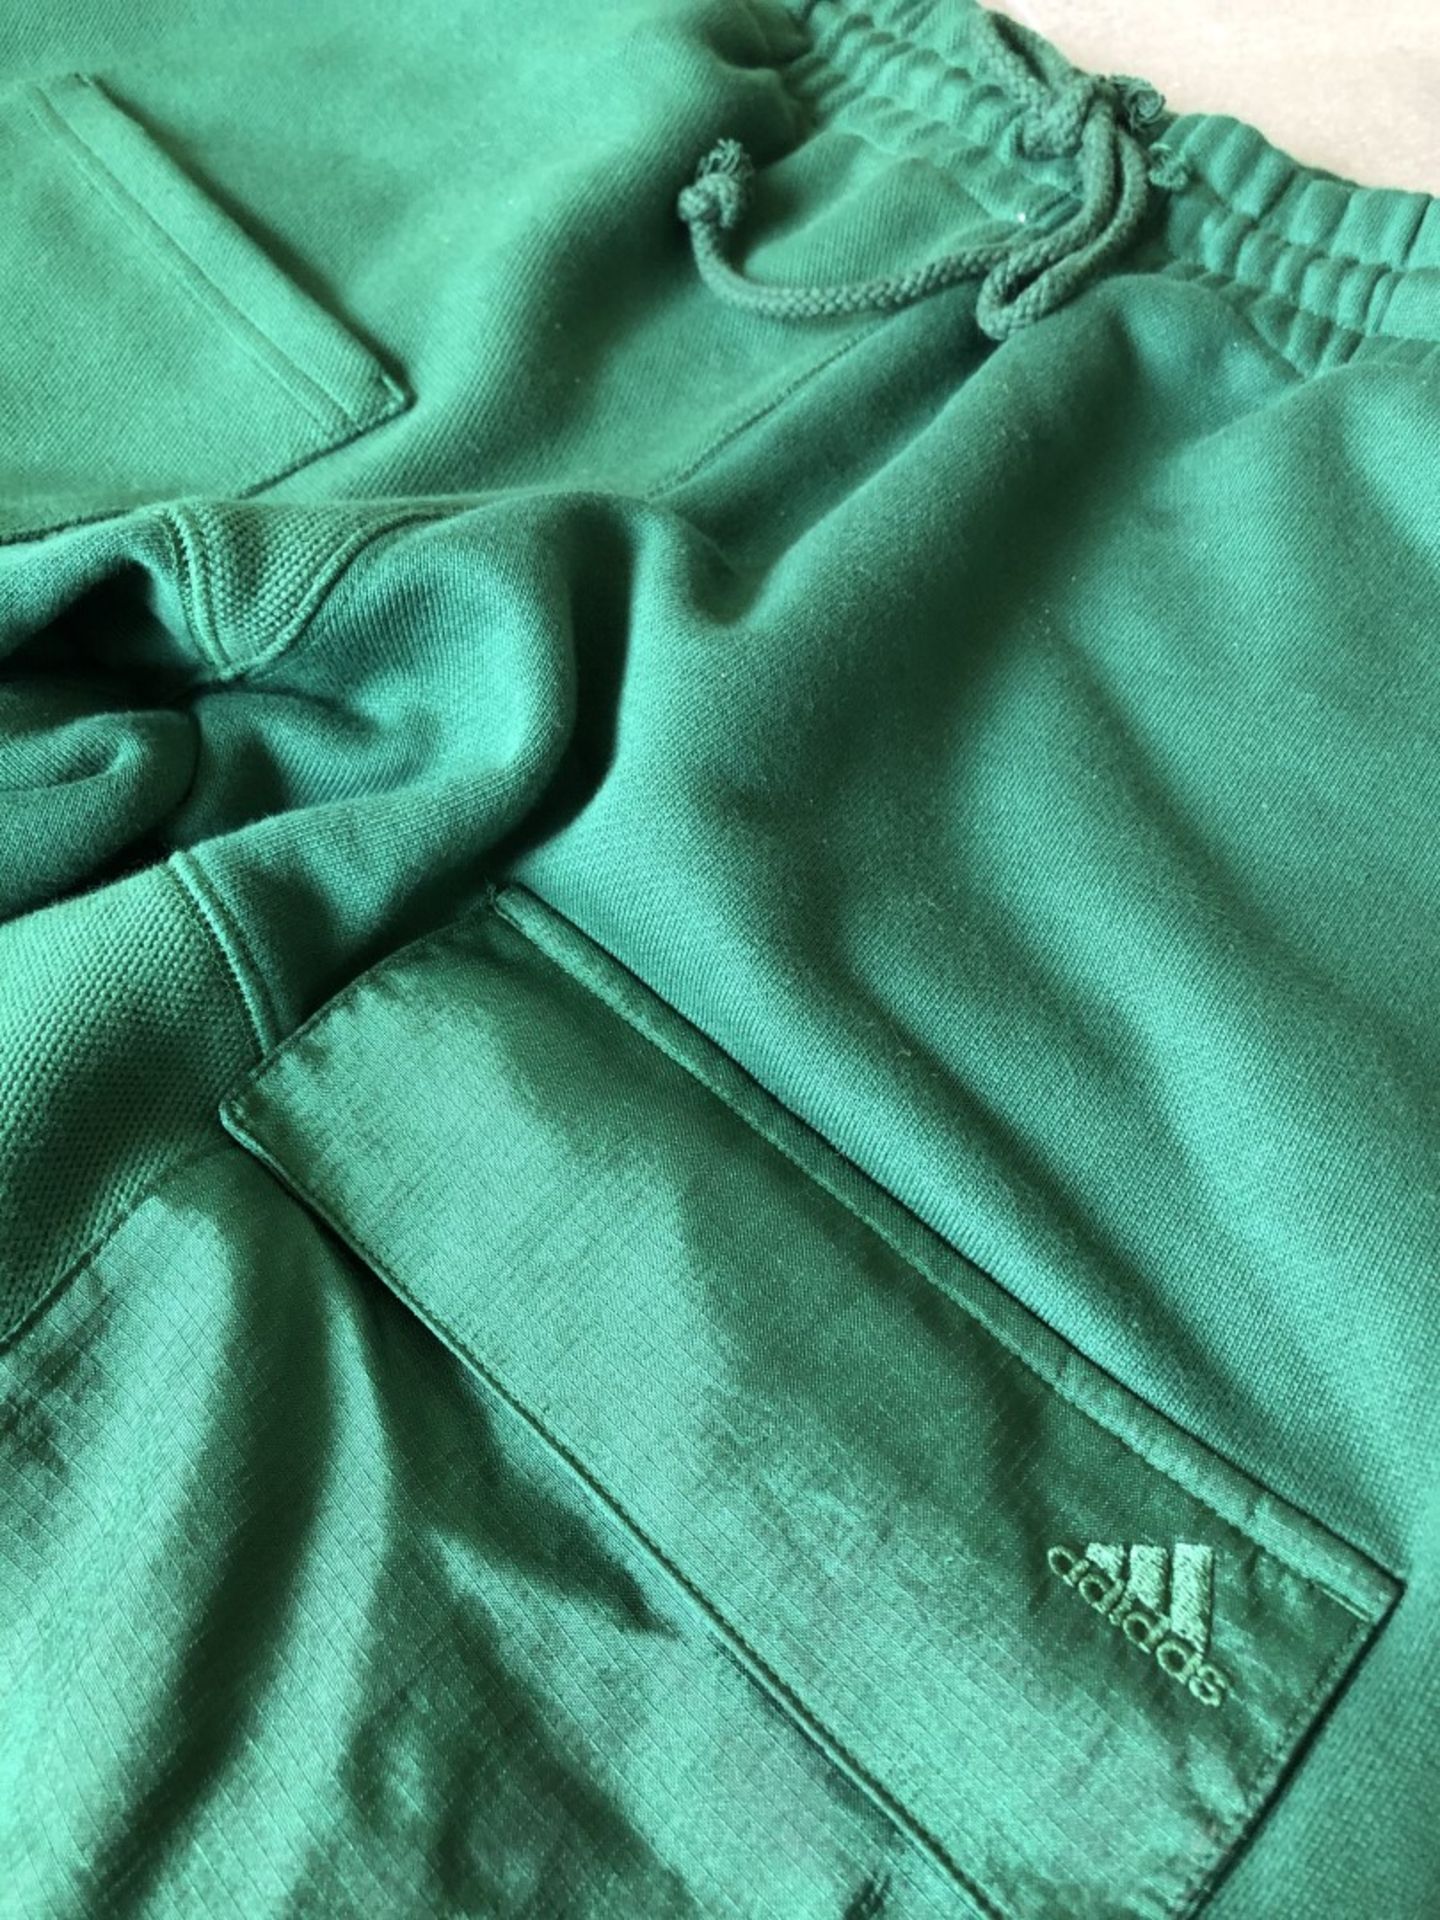 1 x Men's Genuine Adidas Ivy Park Tracksuit In Cargo Dark Green - Size (EU/UK): L/L - Preowned - - Image 11 of 14